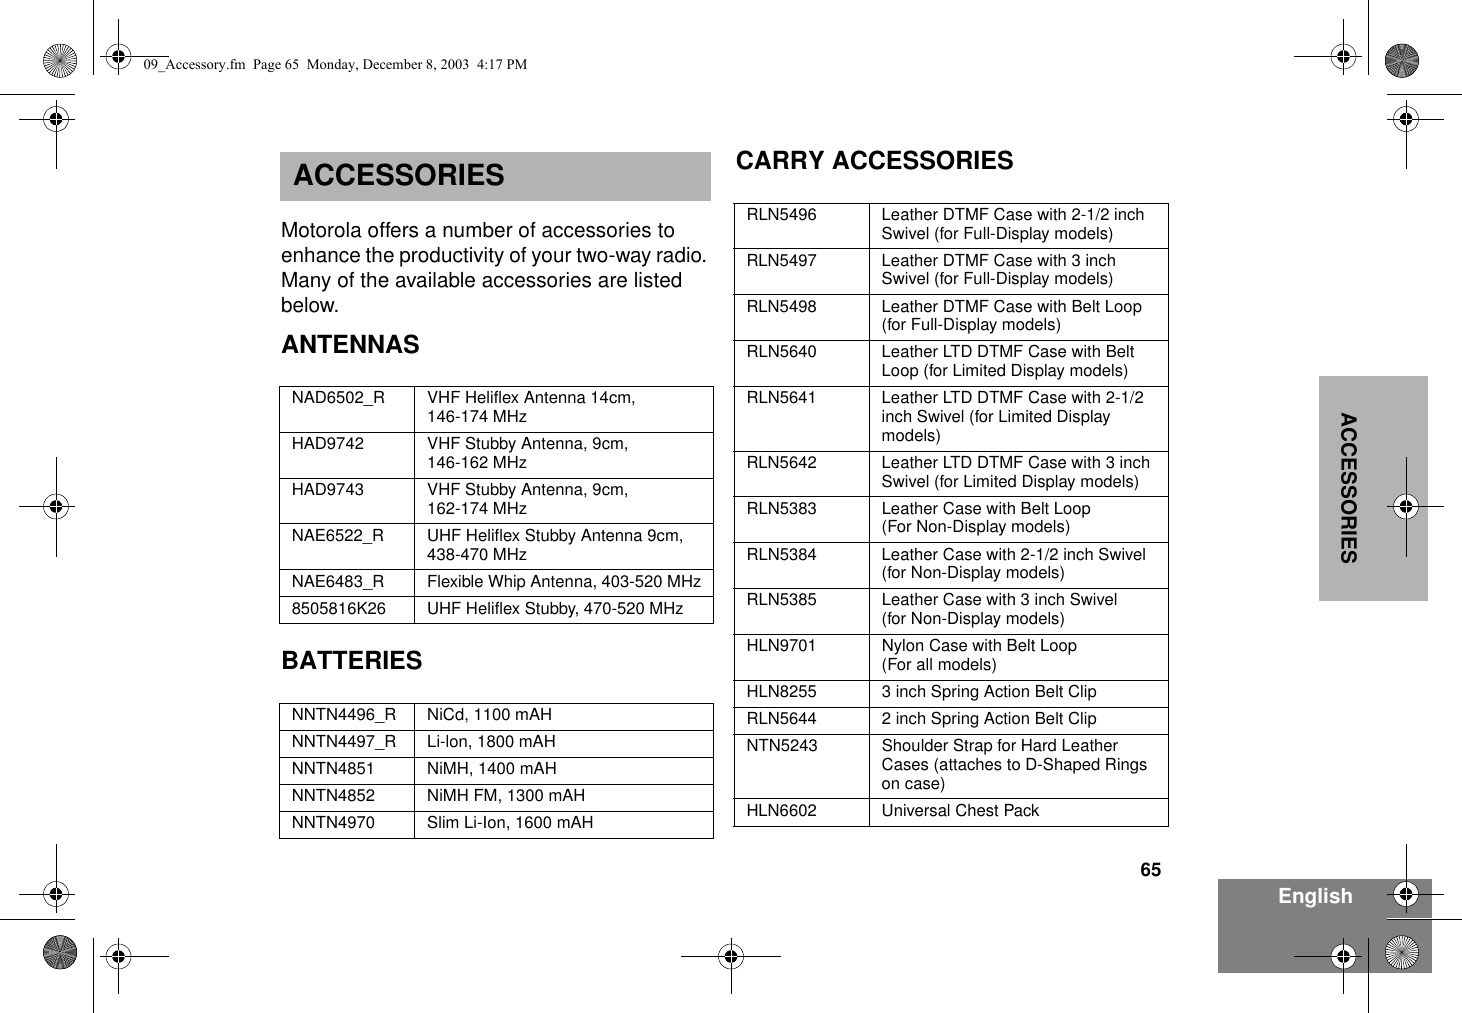 65EnglishACCESSORIESACCESSORIESMotorola offers a number of accessories to enhance the productivity of your two-way radio. Many of the available accessories are listed below.ANTENNASBATTERIESCARRY ACCESSORIESNAD6502_R VHF Heliflex Antenna 14cm, 146-174 MHzHAD9742 VHF Stubby Antenna, 9cm,146-162 MHzHAD9743 VHF Stubby Antenna, 9cm,162-174 MHzNAE6522_R UHF Heliflex Stubby Antenna 9cm, 438-470 MHzNAE6483_R Flexible Whip Antenna, 403-520 MHz8505816K26 UHF Heliflex Stubby, 470-520 MHzNNTN4496_R NiCd, 1100 mAHNNTN4497_R Li-lon, 1800 mAHNNTN4851 NiMH, 1400 mAHNNTN4852 NiMH FM, 1300 mAHNNTN4970 Slim Li-Ion, 1600 mAHRLN5496 Leather DTMF Case with 2-1/2 inch Swivel (for Full-Display models)RLN5497 Leather DTMF Case with 3 inch Swivel (for Full-Display models)RLN5498 Leather DTMF Case with Belt Loop(for Full-Display models)RLN5640 Leather LTD DTMF Case with Belt Loop (for Limited Display models)RLN5641 Leather LTD DTMF Case with 2-1/2 inch Swivel (for Limited Display models)RLN5642 Leather LTD DTMF Case with 3 inch Swivel (for Limited Display models)RLN5383 Leather Case with Belt Loop(For Non-Display models)RLN5384 Leather Case with 2-1/2 inch Swivel(for Non-Display models)RLN5385 Leather Case with 3 inch Swivel(for Non-Display models)HLN9701 Nylon Case with Belt Loop (For all models)HLN8255 3 inch Spring Action Belt ClipRLN5644 2 inch Spring Action Belt ClipNTN5243 Shoulder Strap for Hard Leather Cases (attaches to D-Shaped Rings on case)HLN6602 Universal Chest Pack09_Accessory.fm  Page 65  Monday, December 8, 2003  4:17 PM